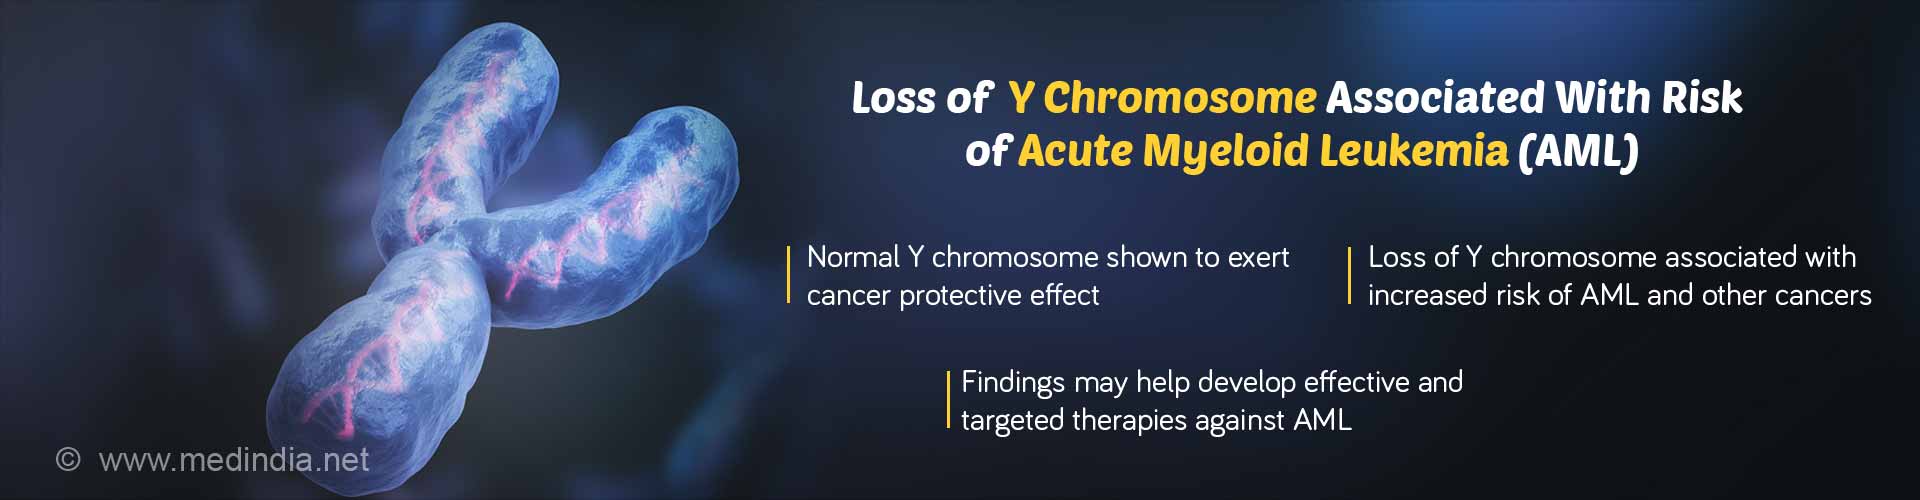 Loss of Y Chromosome Associated With Risk of Acute Myeloid Leukemia (AML)
Normal Y chromosome shown to exert cancer protective effect
Loss of Y chromosome associated with increased risk of AML and other cancers
Findings may help develop effective and targeted therapies against AML